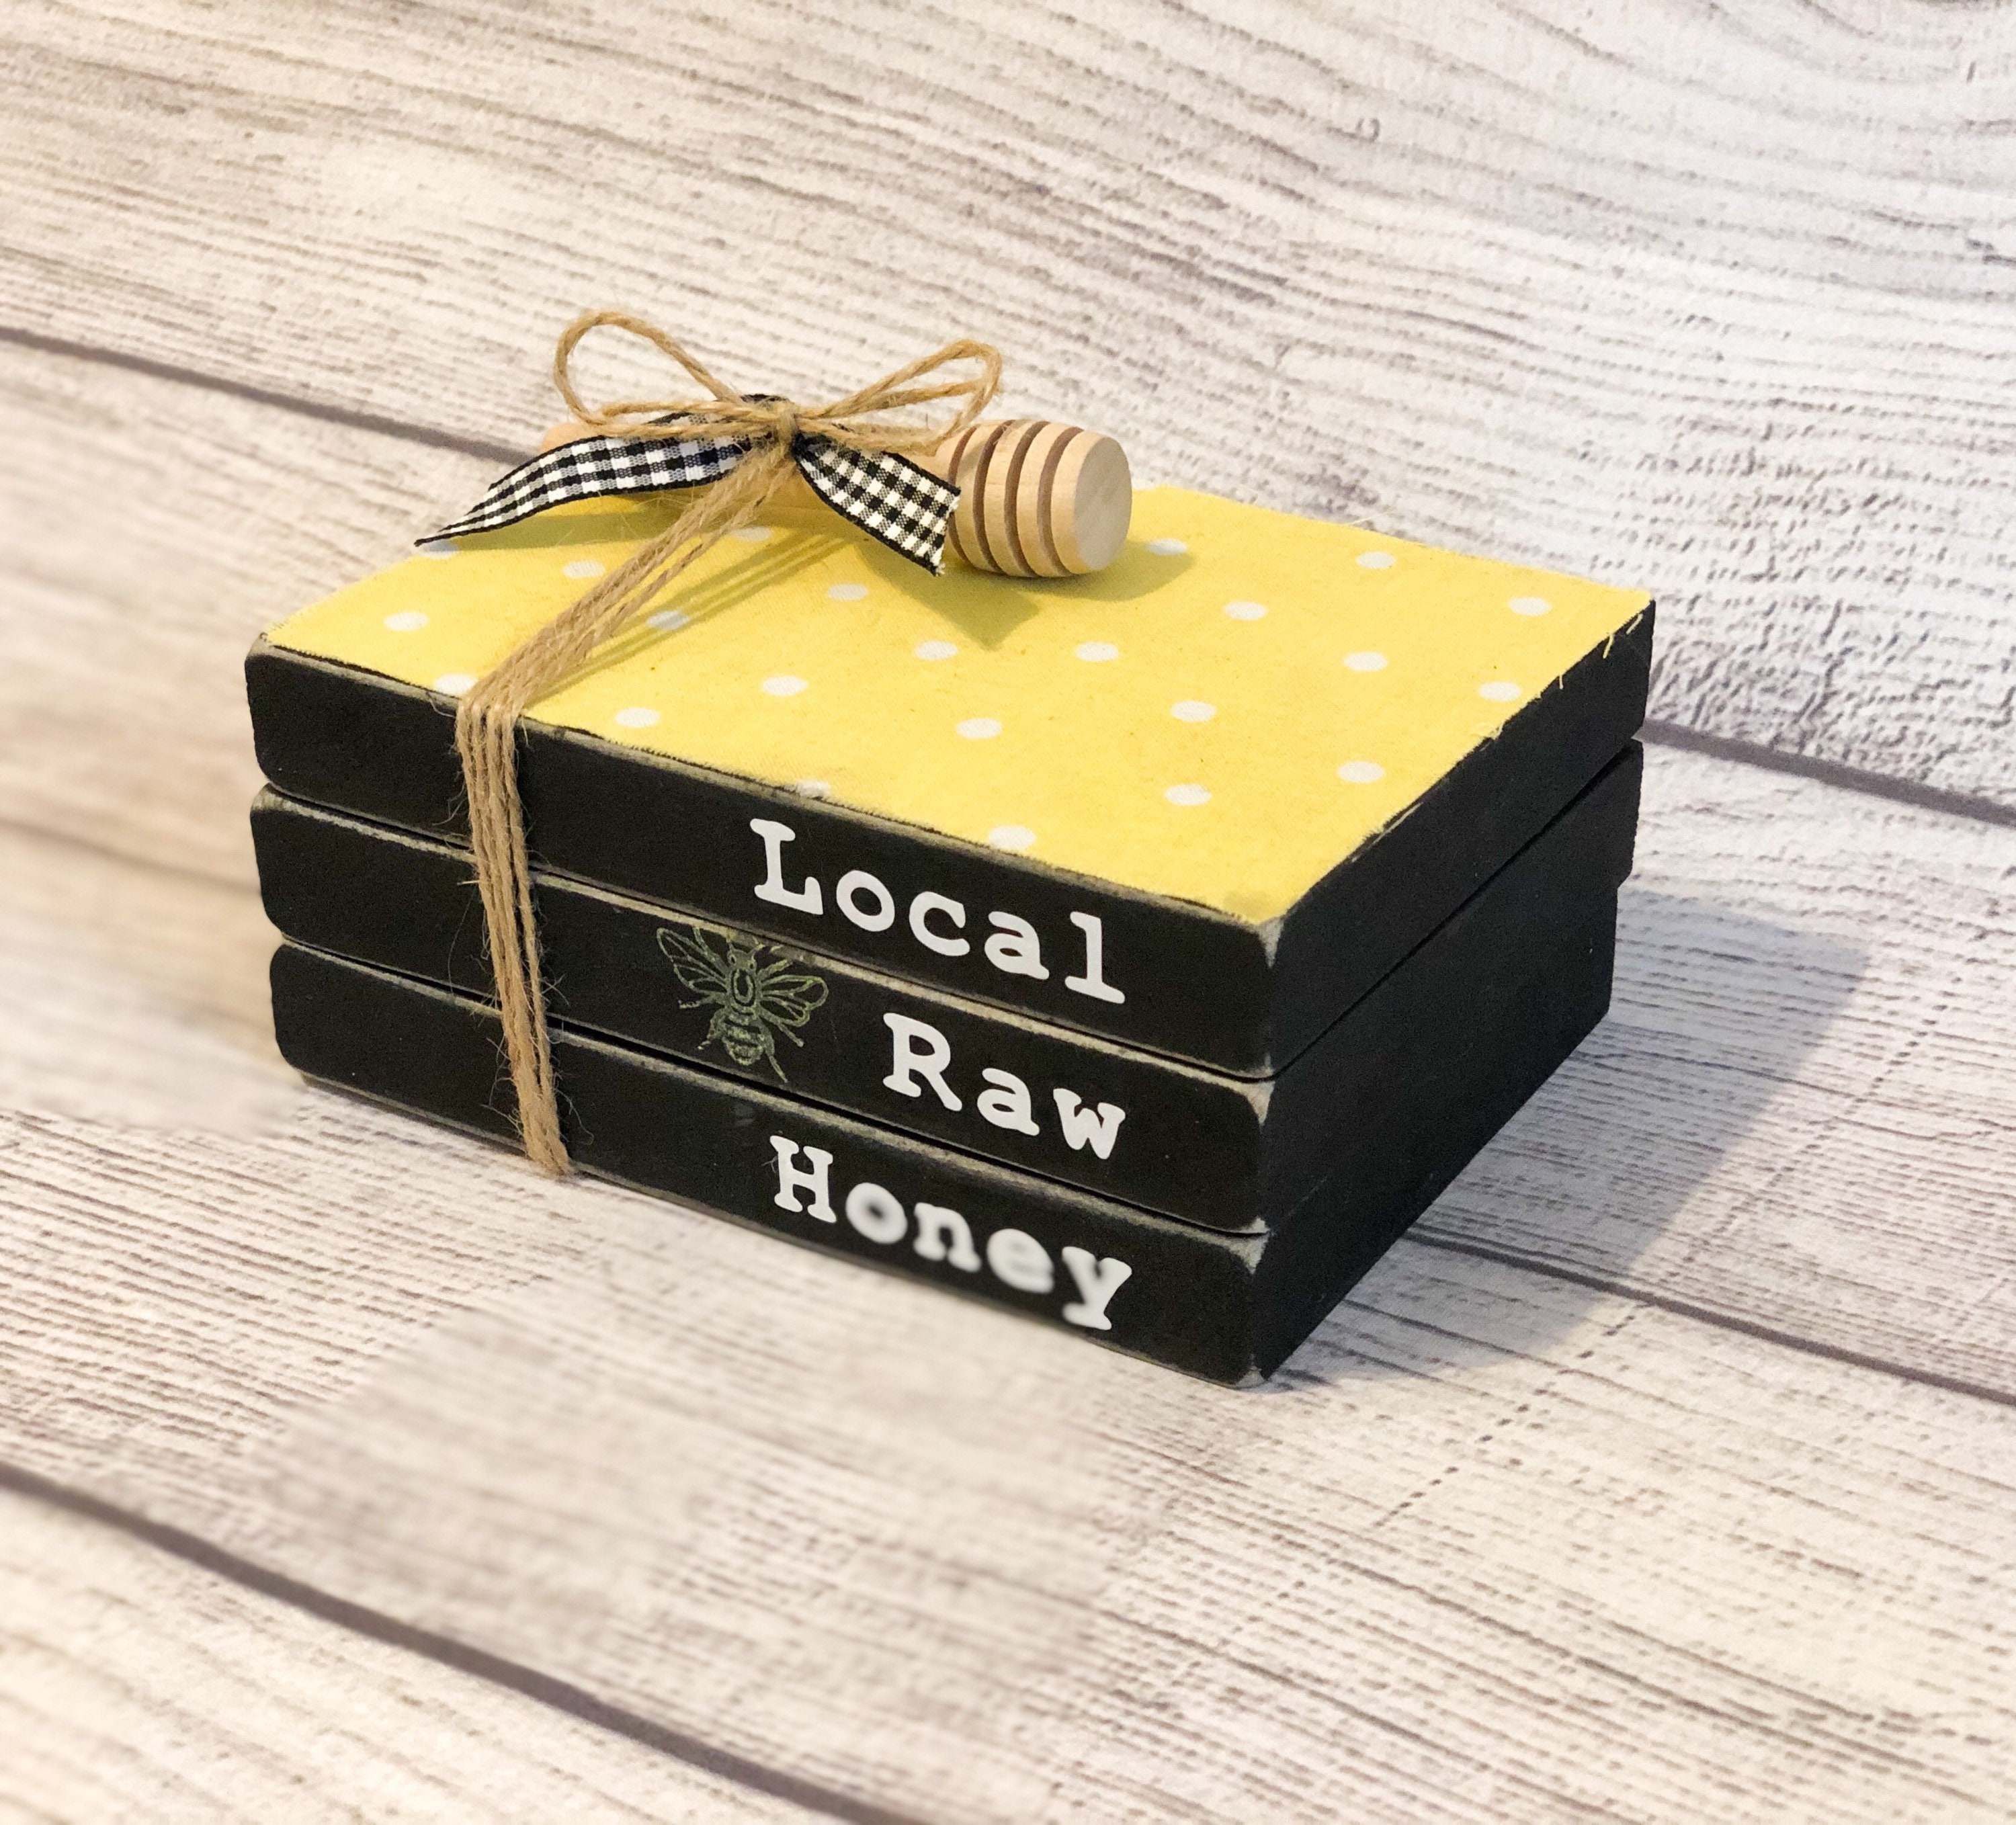 Honey Bee Decor for Home - Bumble Bee Tiered Tray Decor - Double Sided Faux  Decorative Book Stack with Ribbon - Farmhouse Rustic Table Decorations for